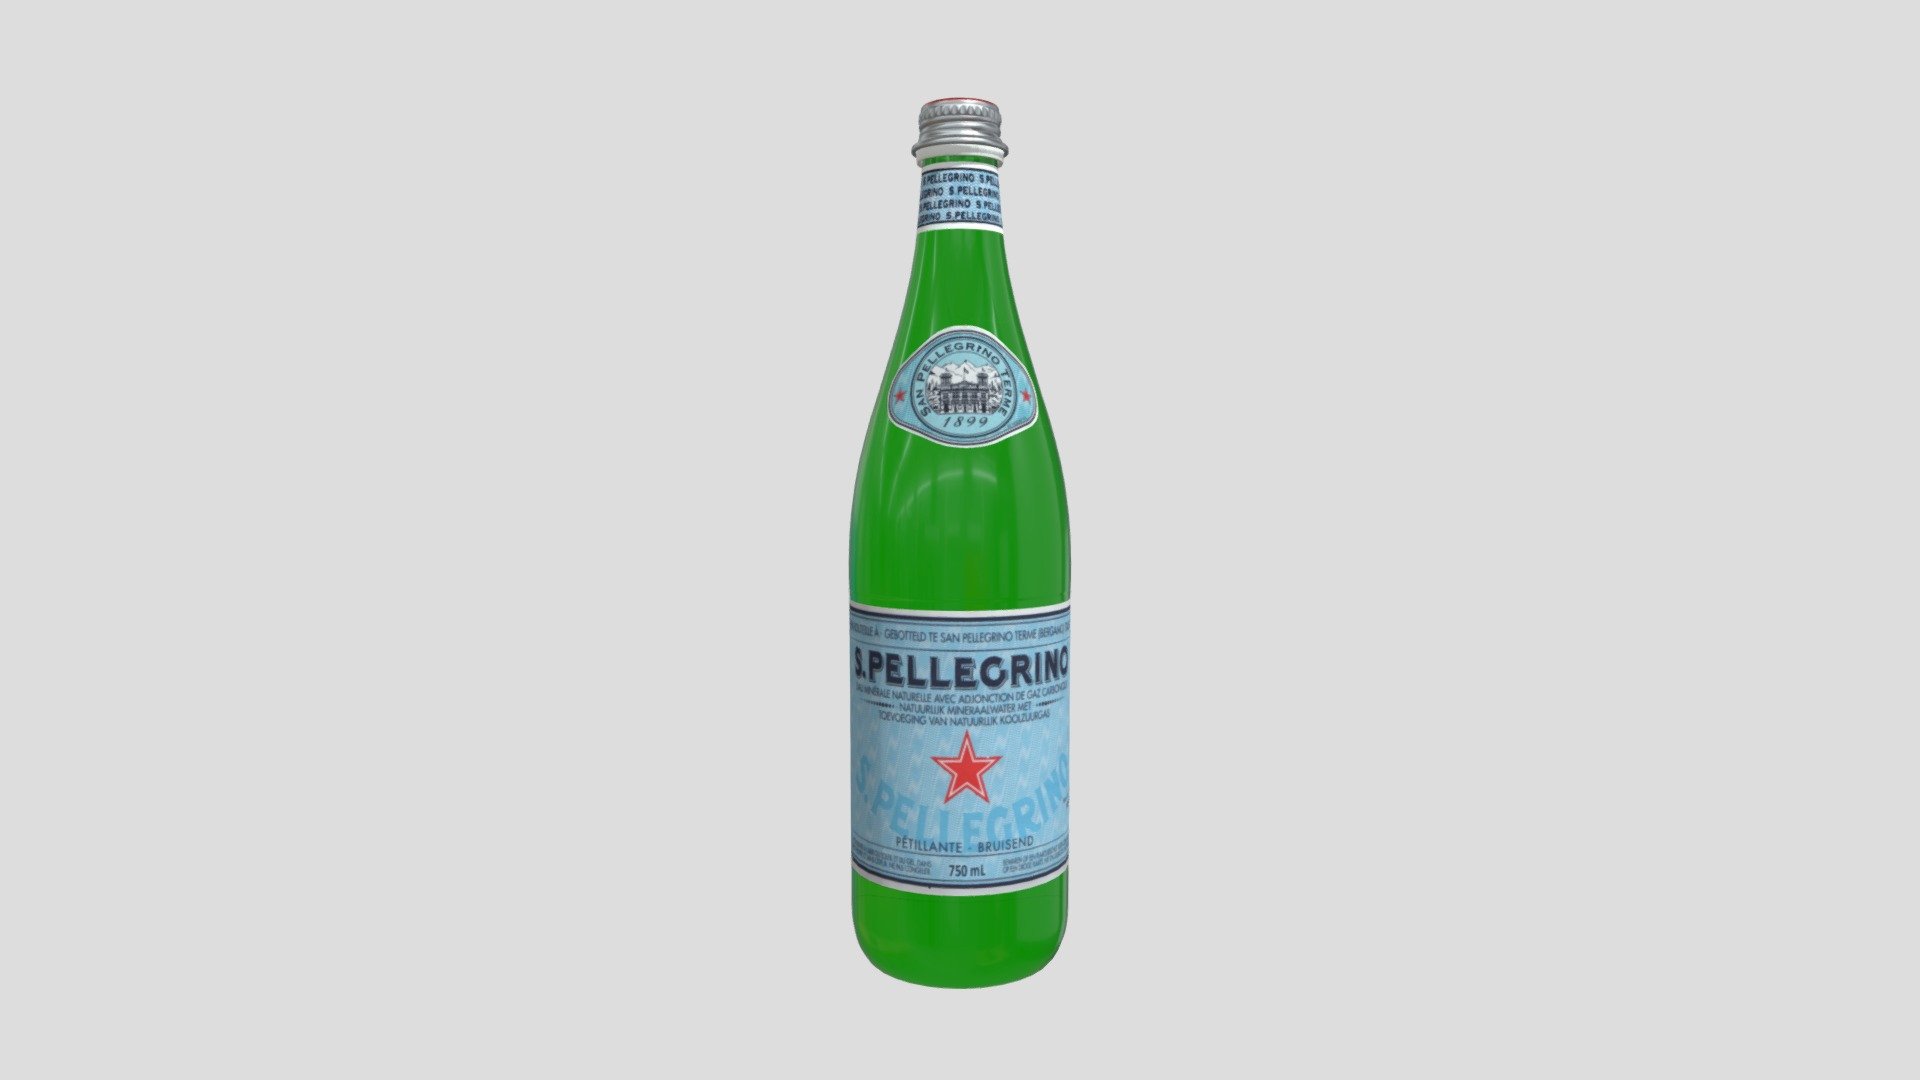 Hello

This is a PBR san pellegrino 750ml .
   3ds max and maya files have appled V-Ray materials . blender have appled PBR materials .
    Model have 7800 polygons .
       All of textures have 2048*2048 and good quality for the near the camera scenes .
          Provided Maps : BaseColor Height Metalness Normal Roughness Opacity
This model is not printable 3d model